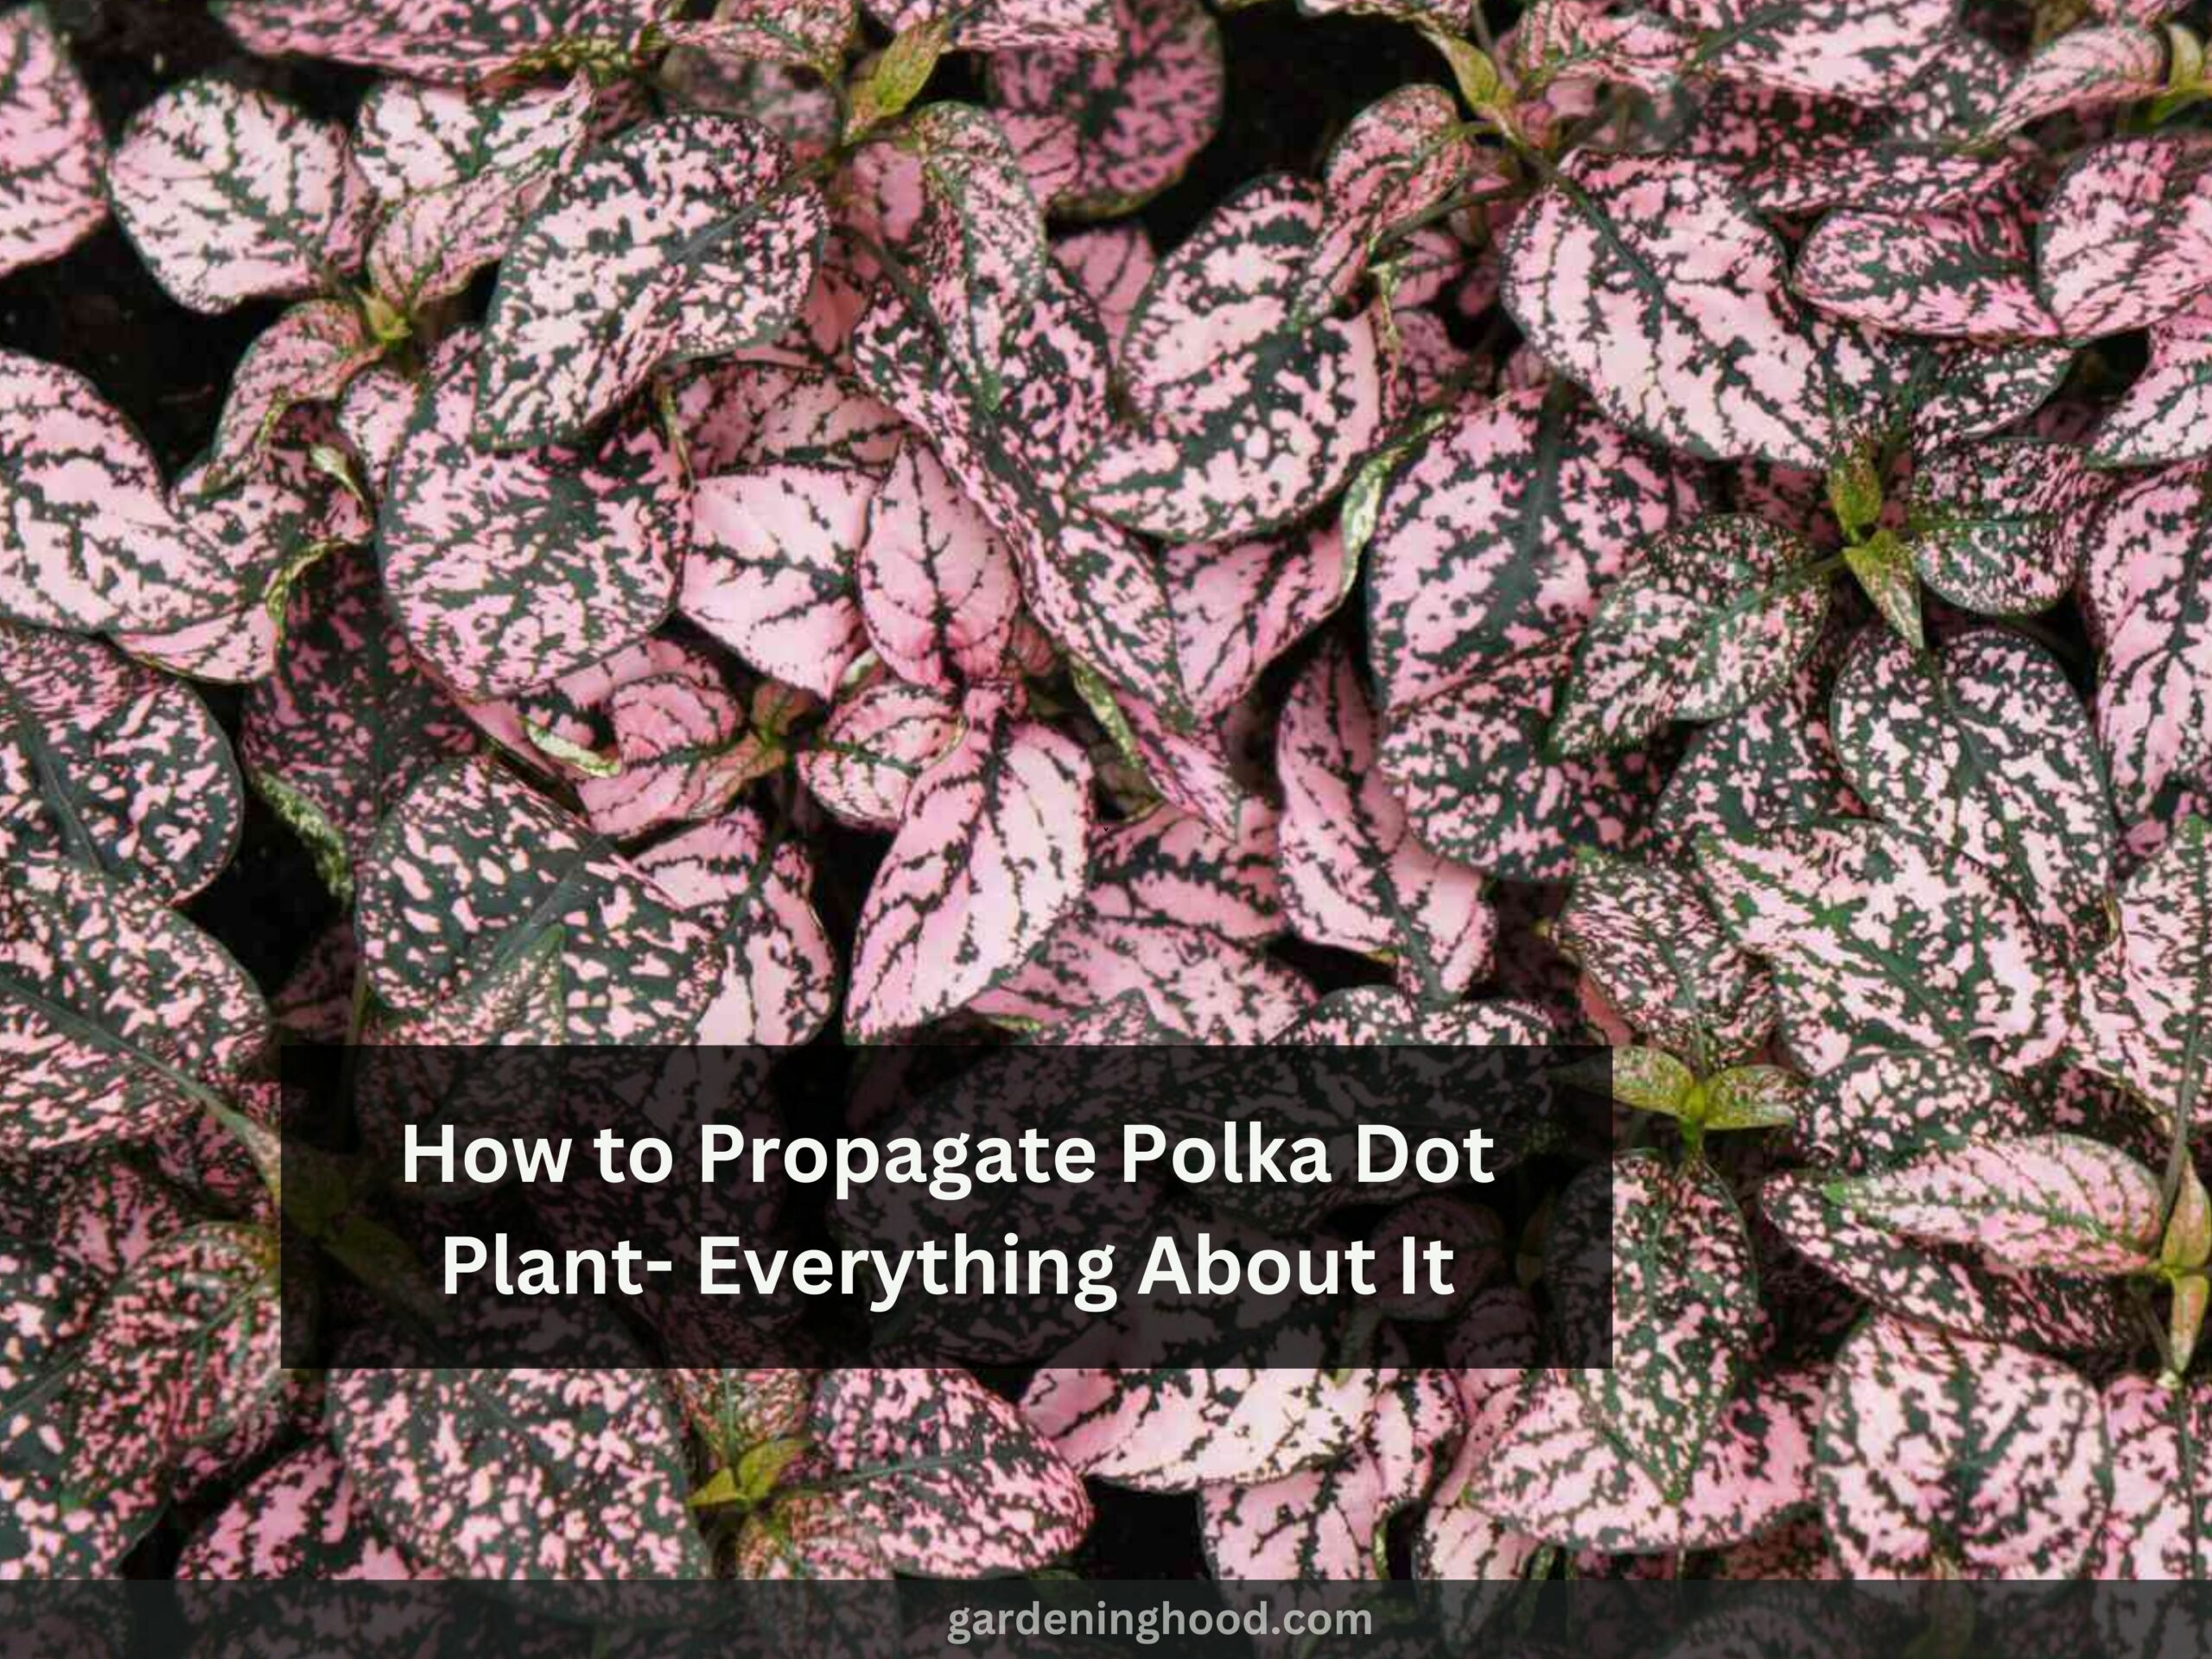 How to Propagate Polka Dot Plant- Everything About It